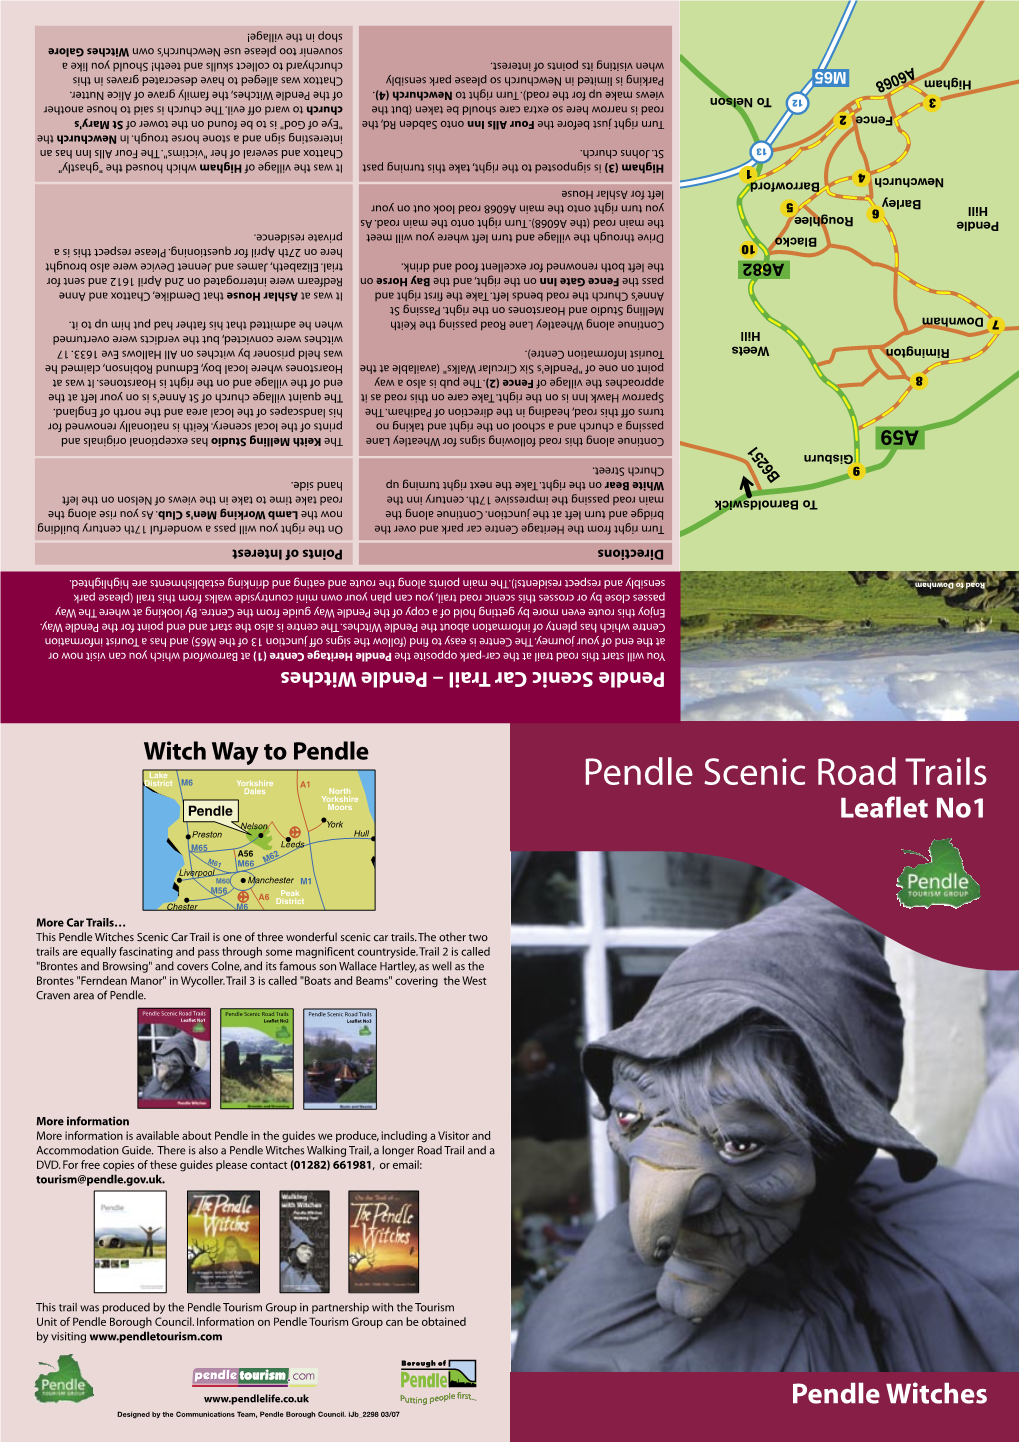 Pendle Witches Car Trail